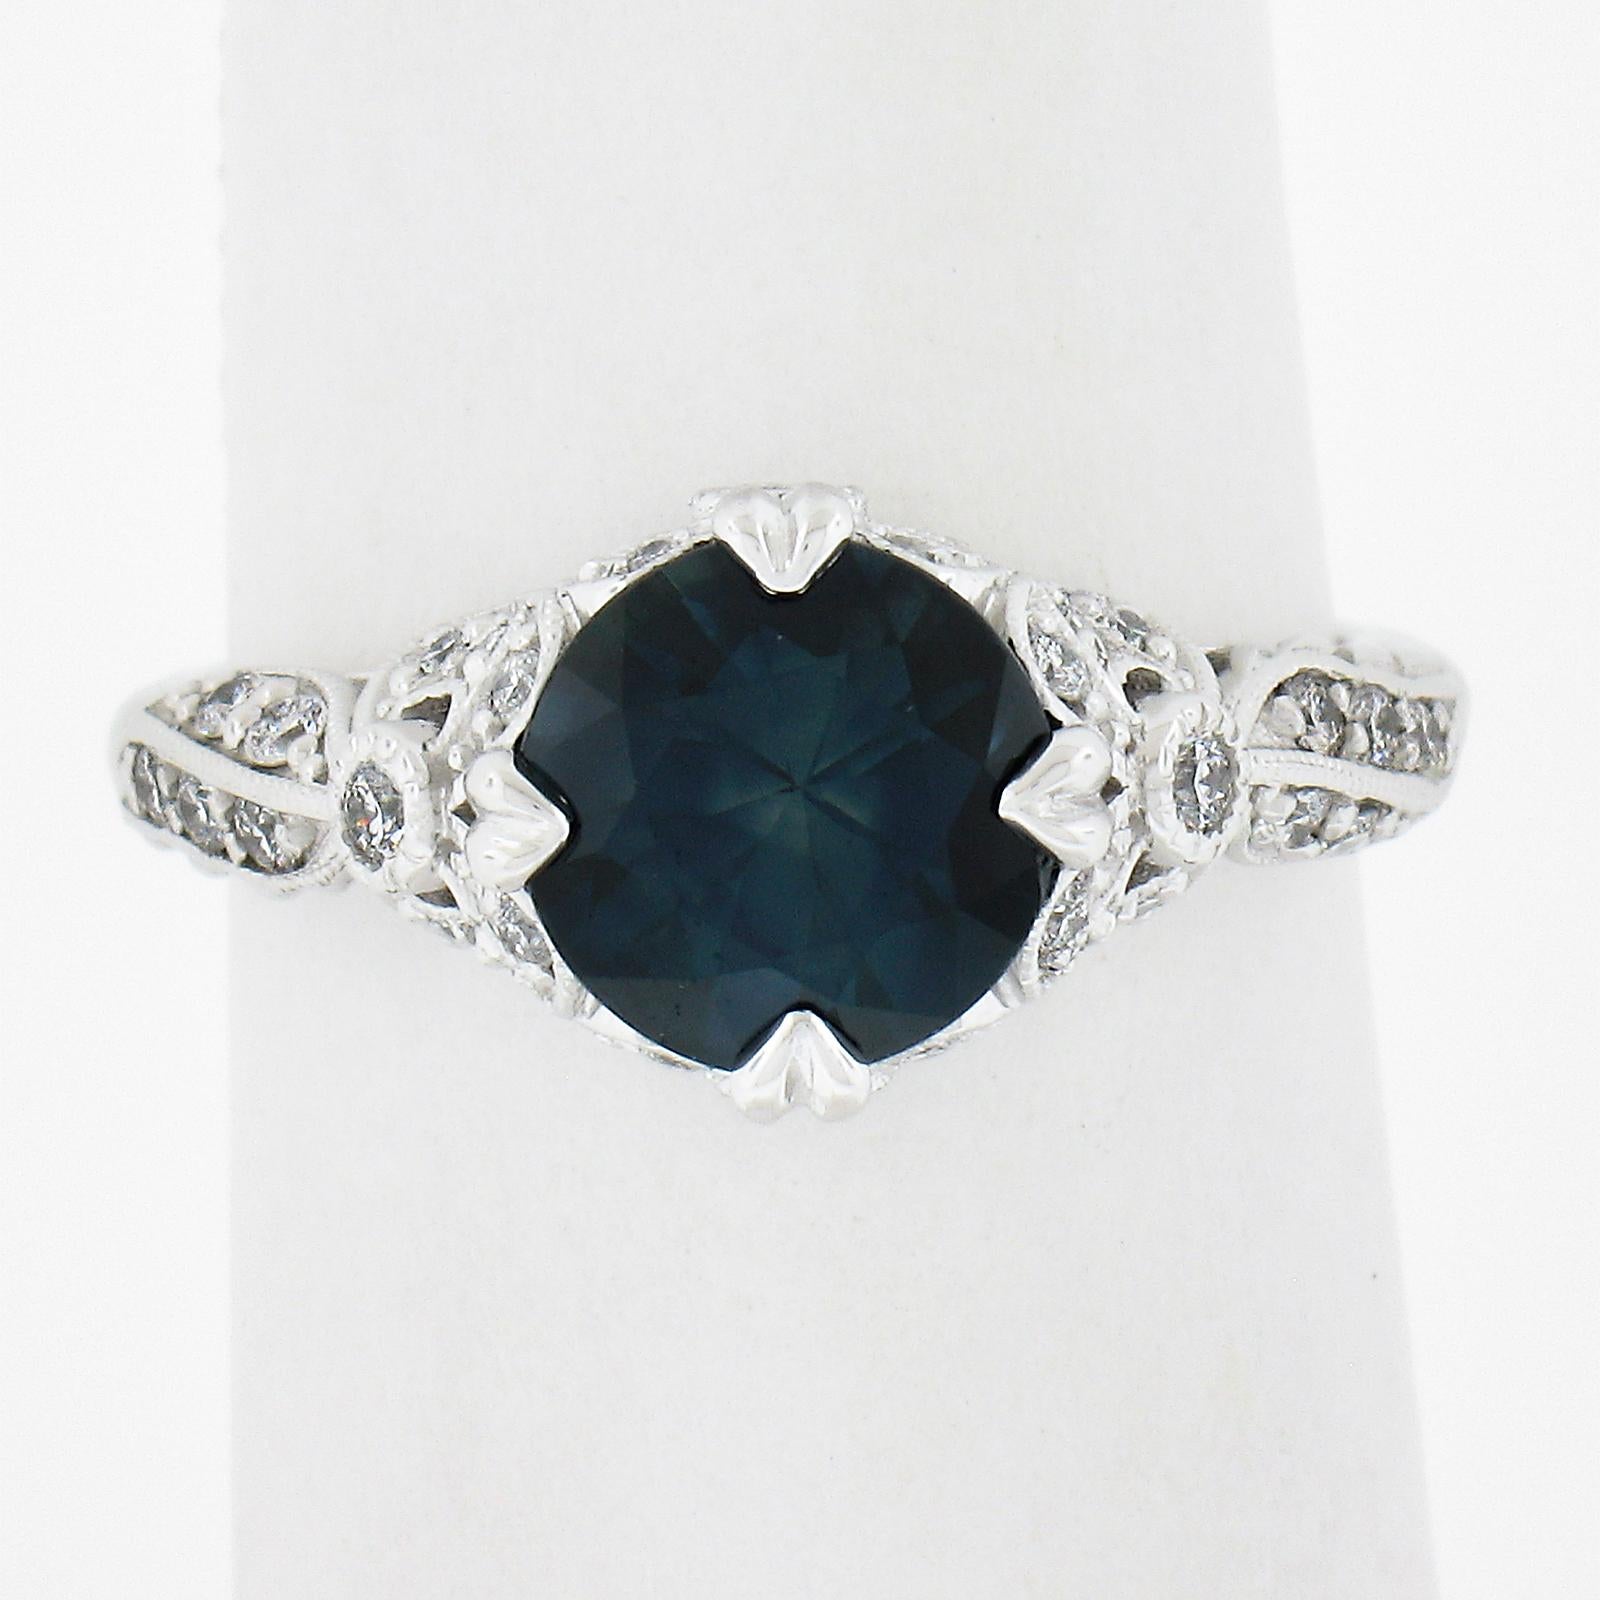 This gorgeous and and well detailed ring features a natural, GIA certified, round cut sapphire weighing approximately 2.25 carat and is perfectly claw-prong set at its center. This gorgeous stone displays a truly mesmerizing slightly greenish blue